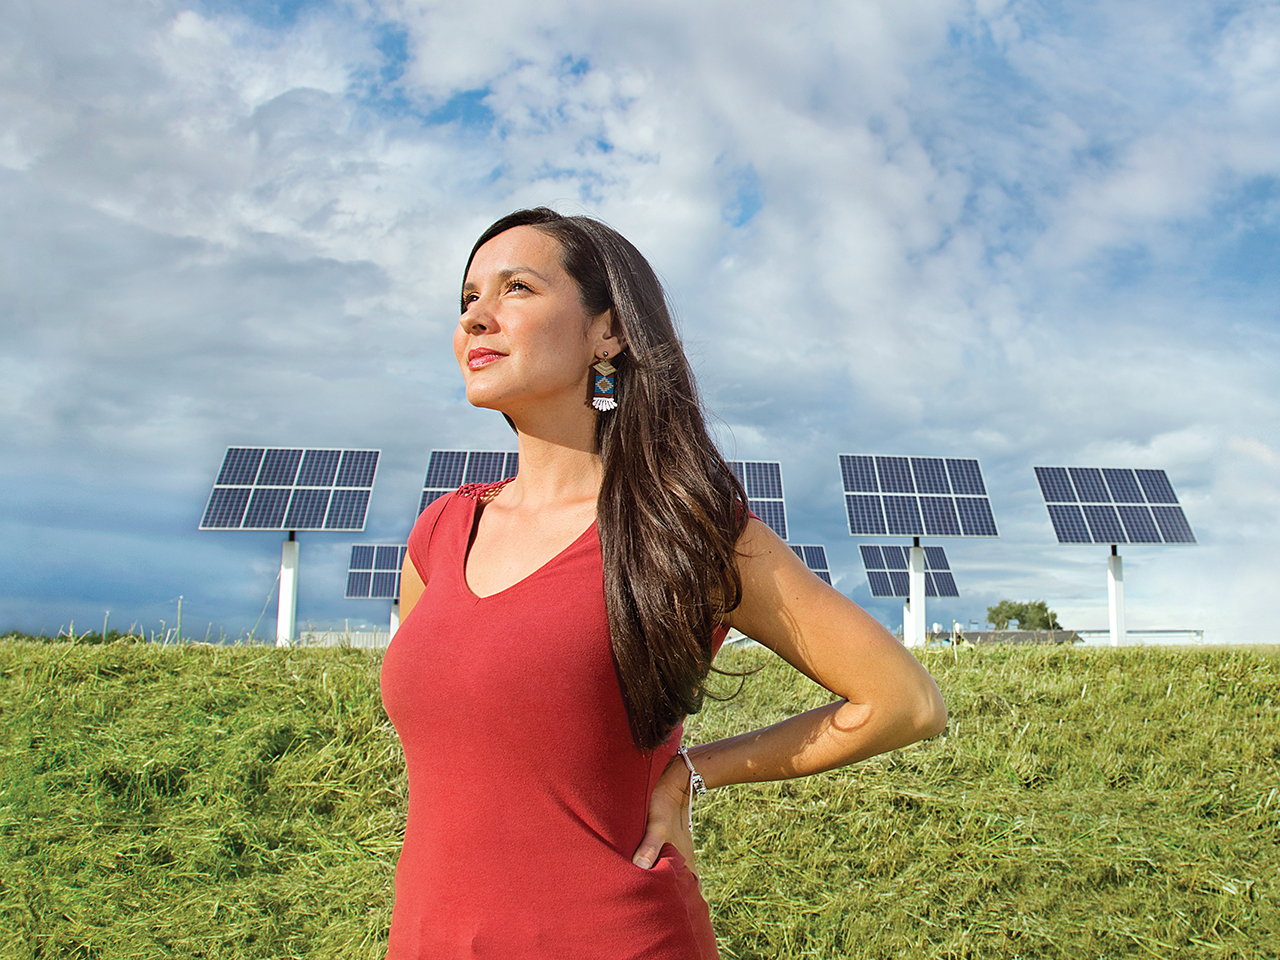 Entrepreneur Melina Laboucan-Massimo stands in front of outdoor solar panels